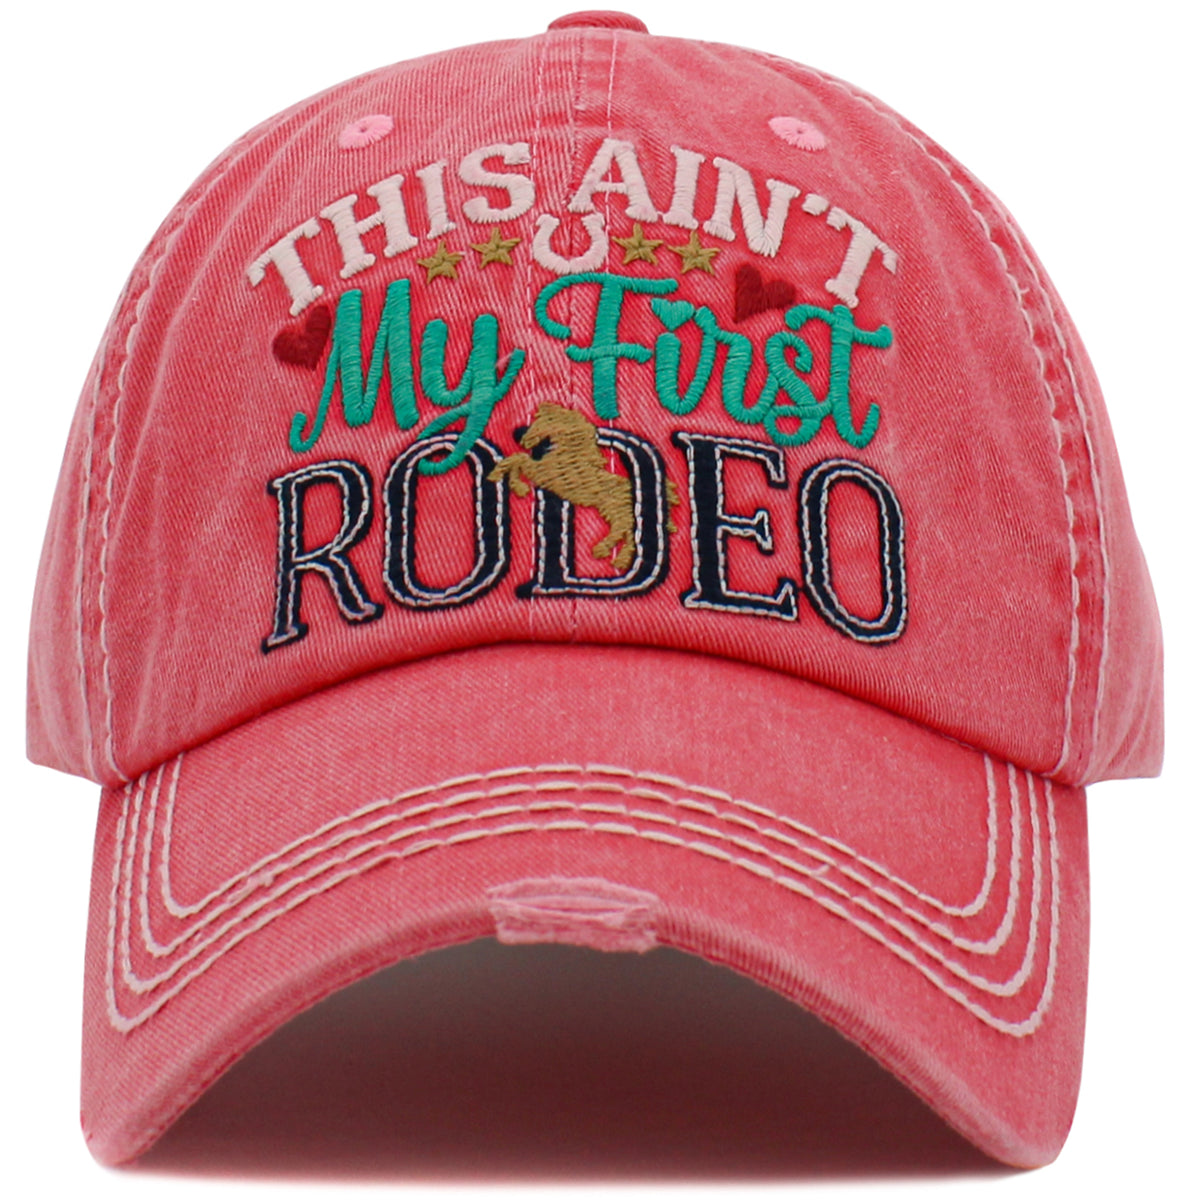 1479 - This Ain't My First Rodeo Hat